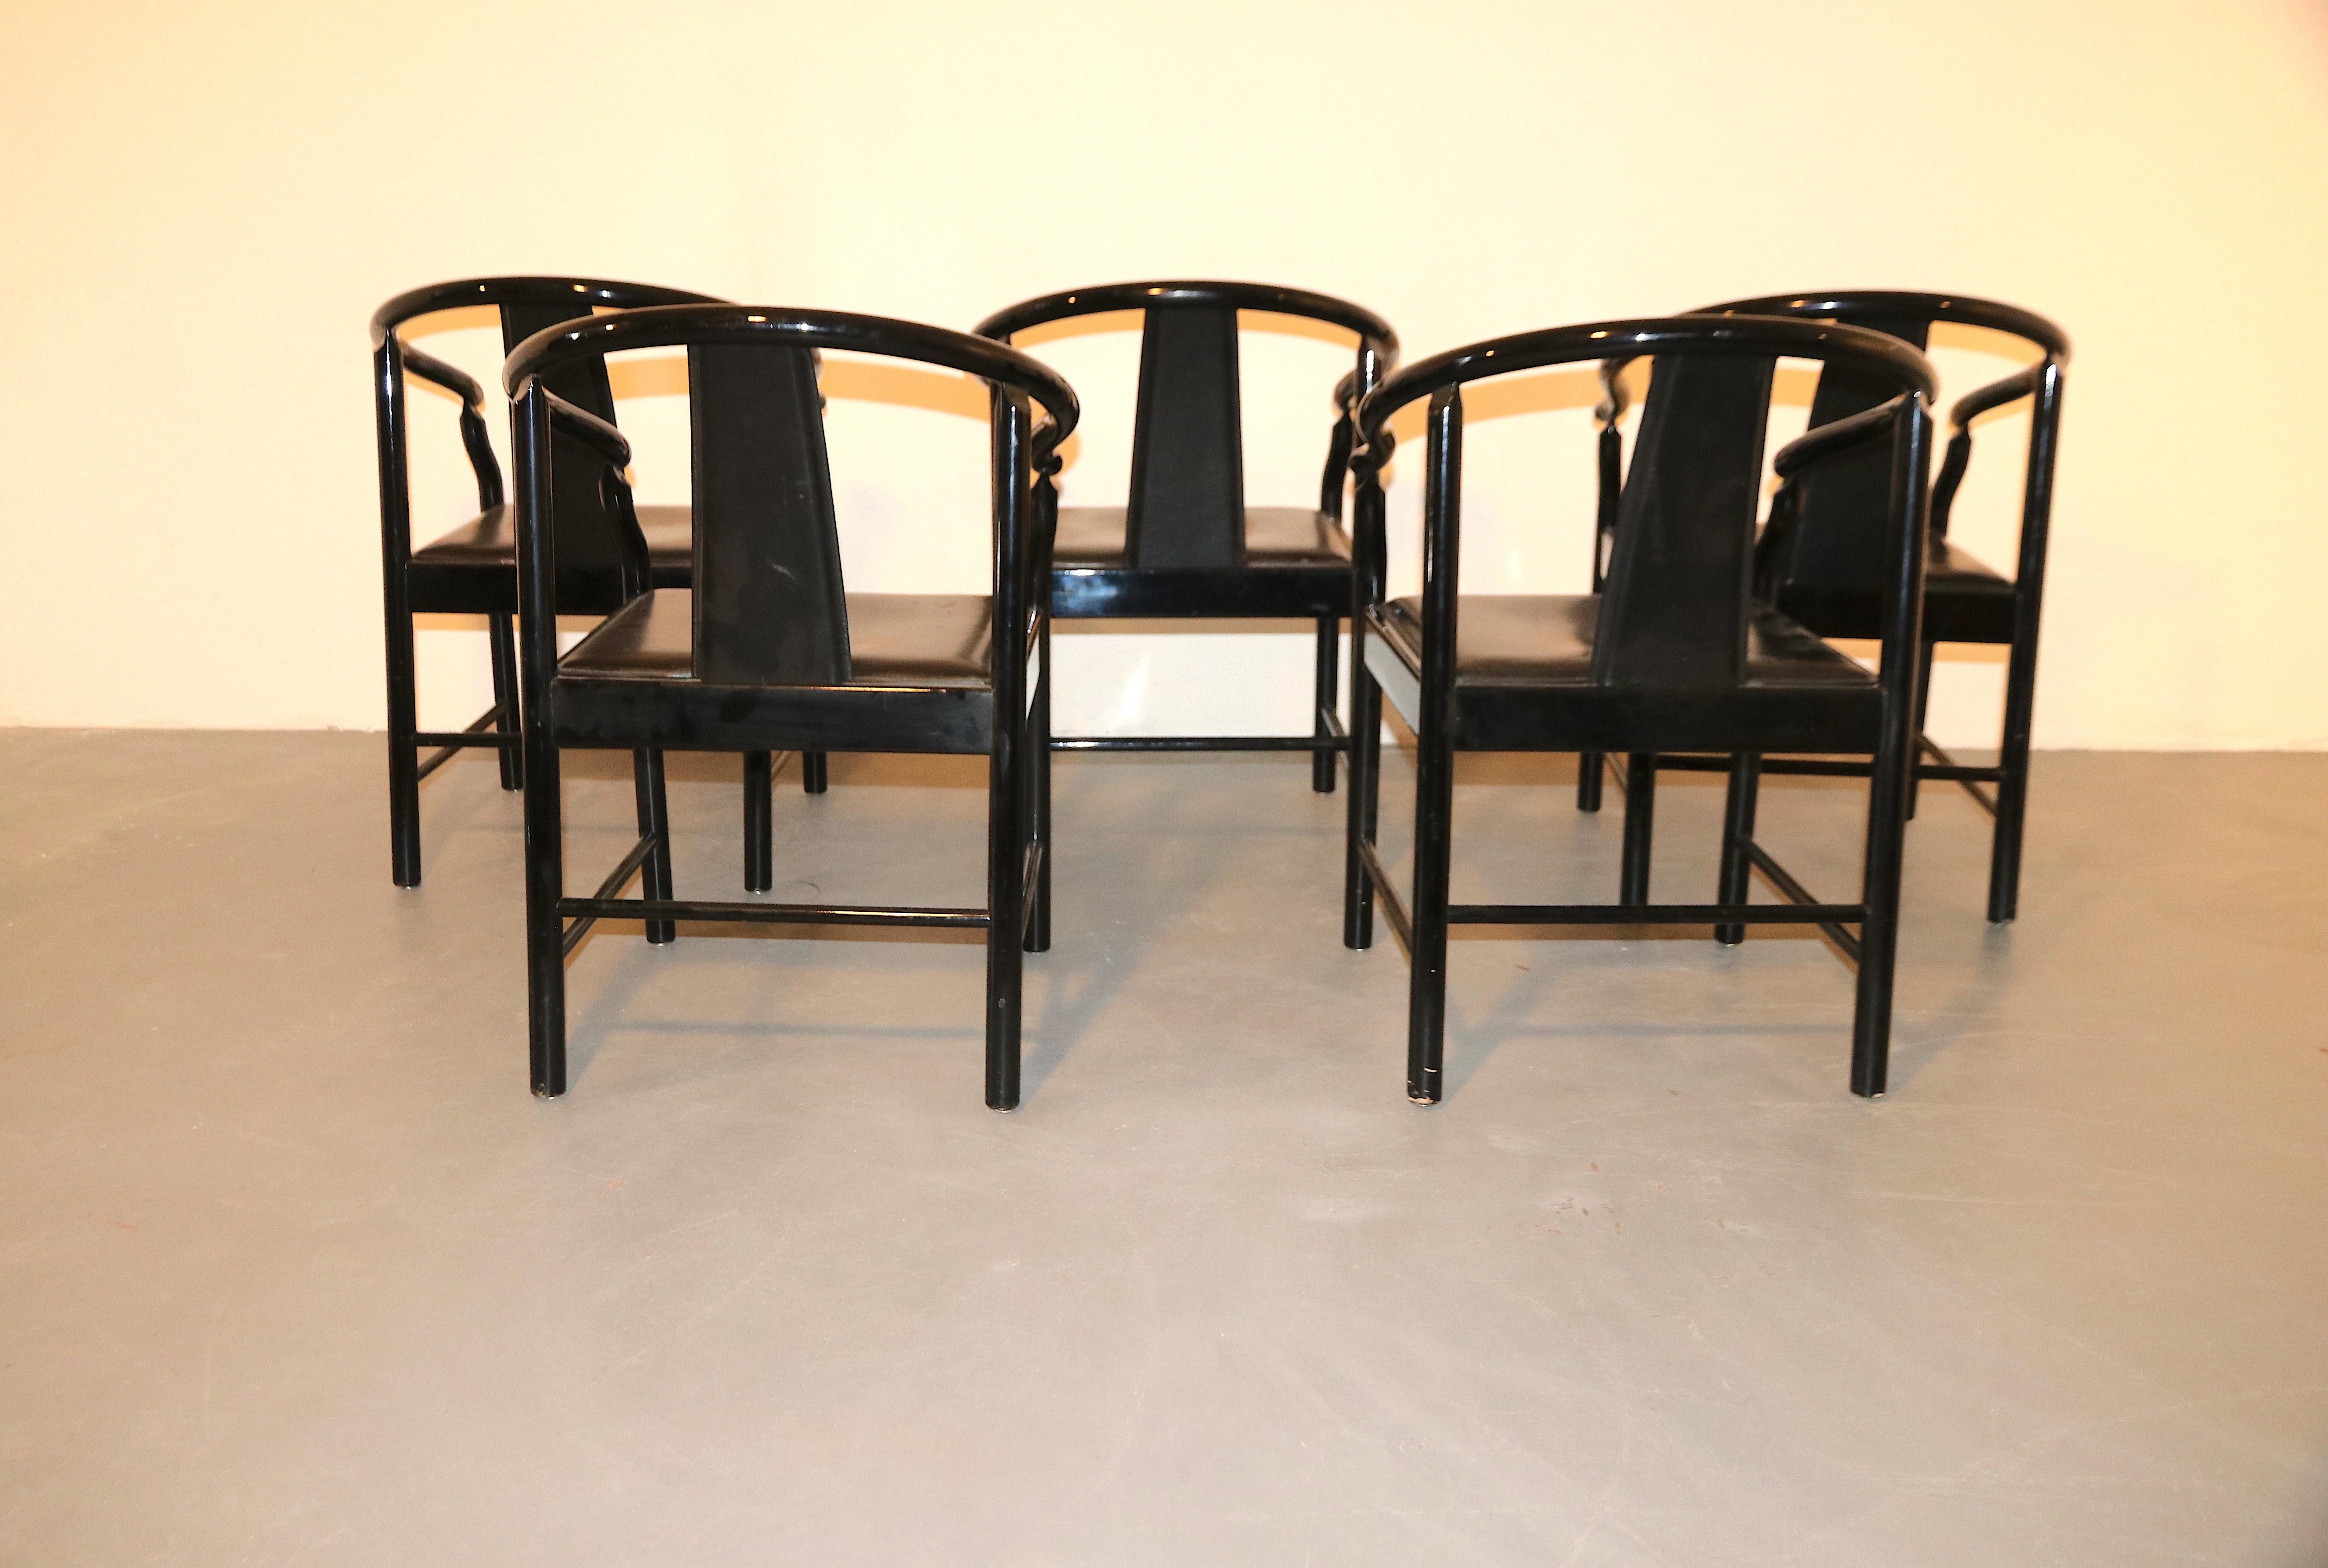 Dyed Five Black Lacquered Dining Chairs, Very Similar to the China Chair For Sale